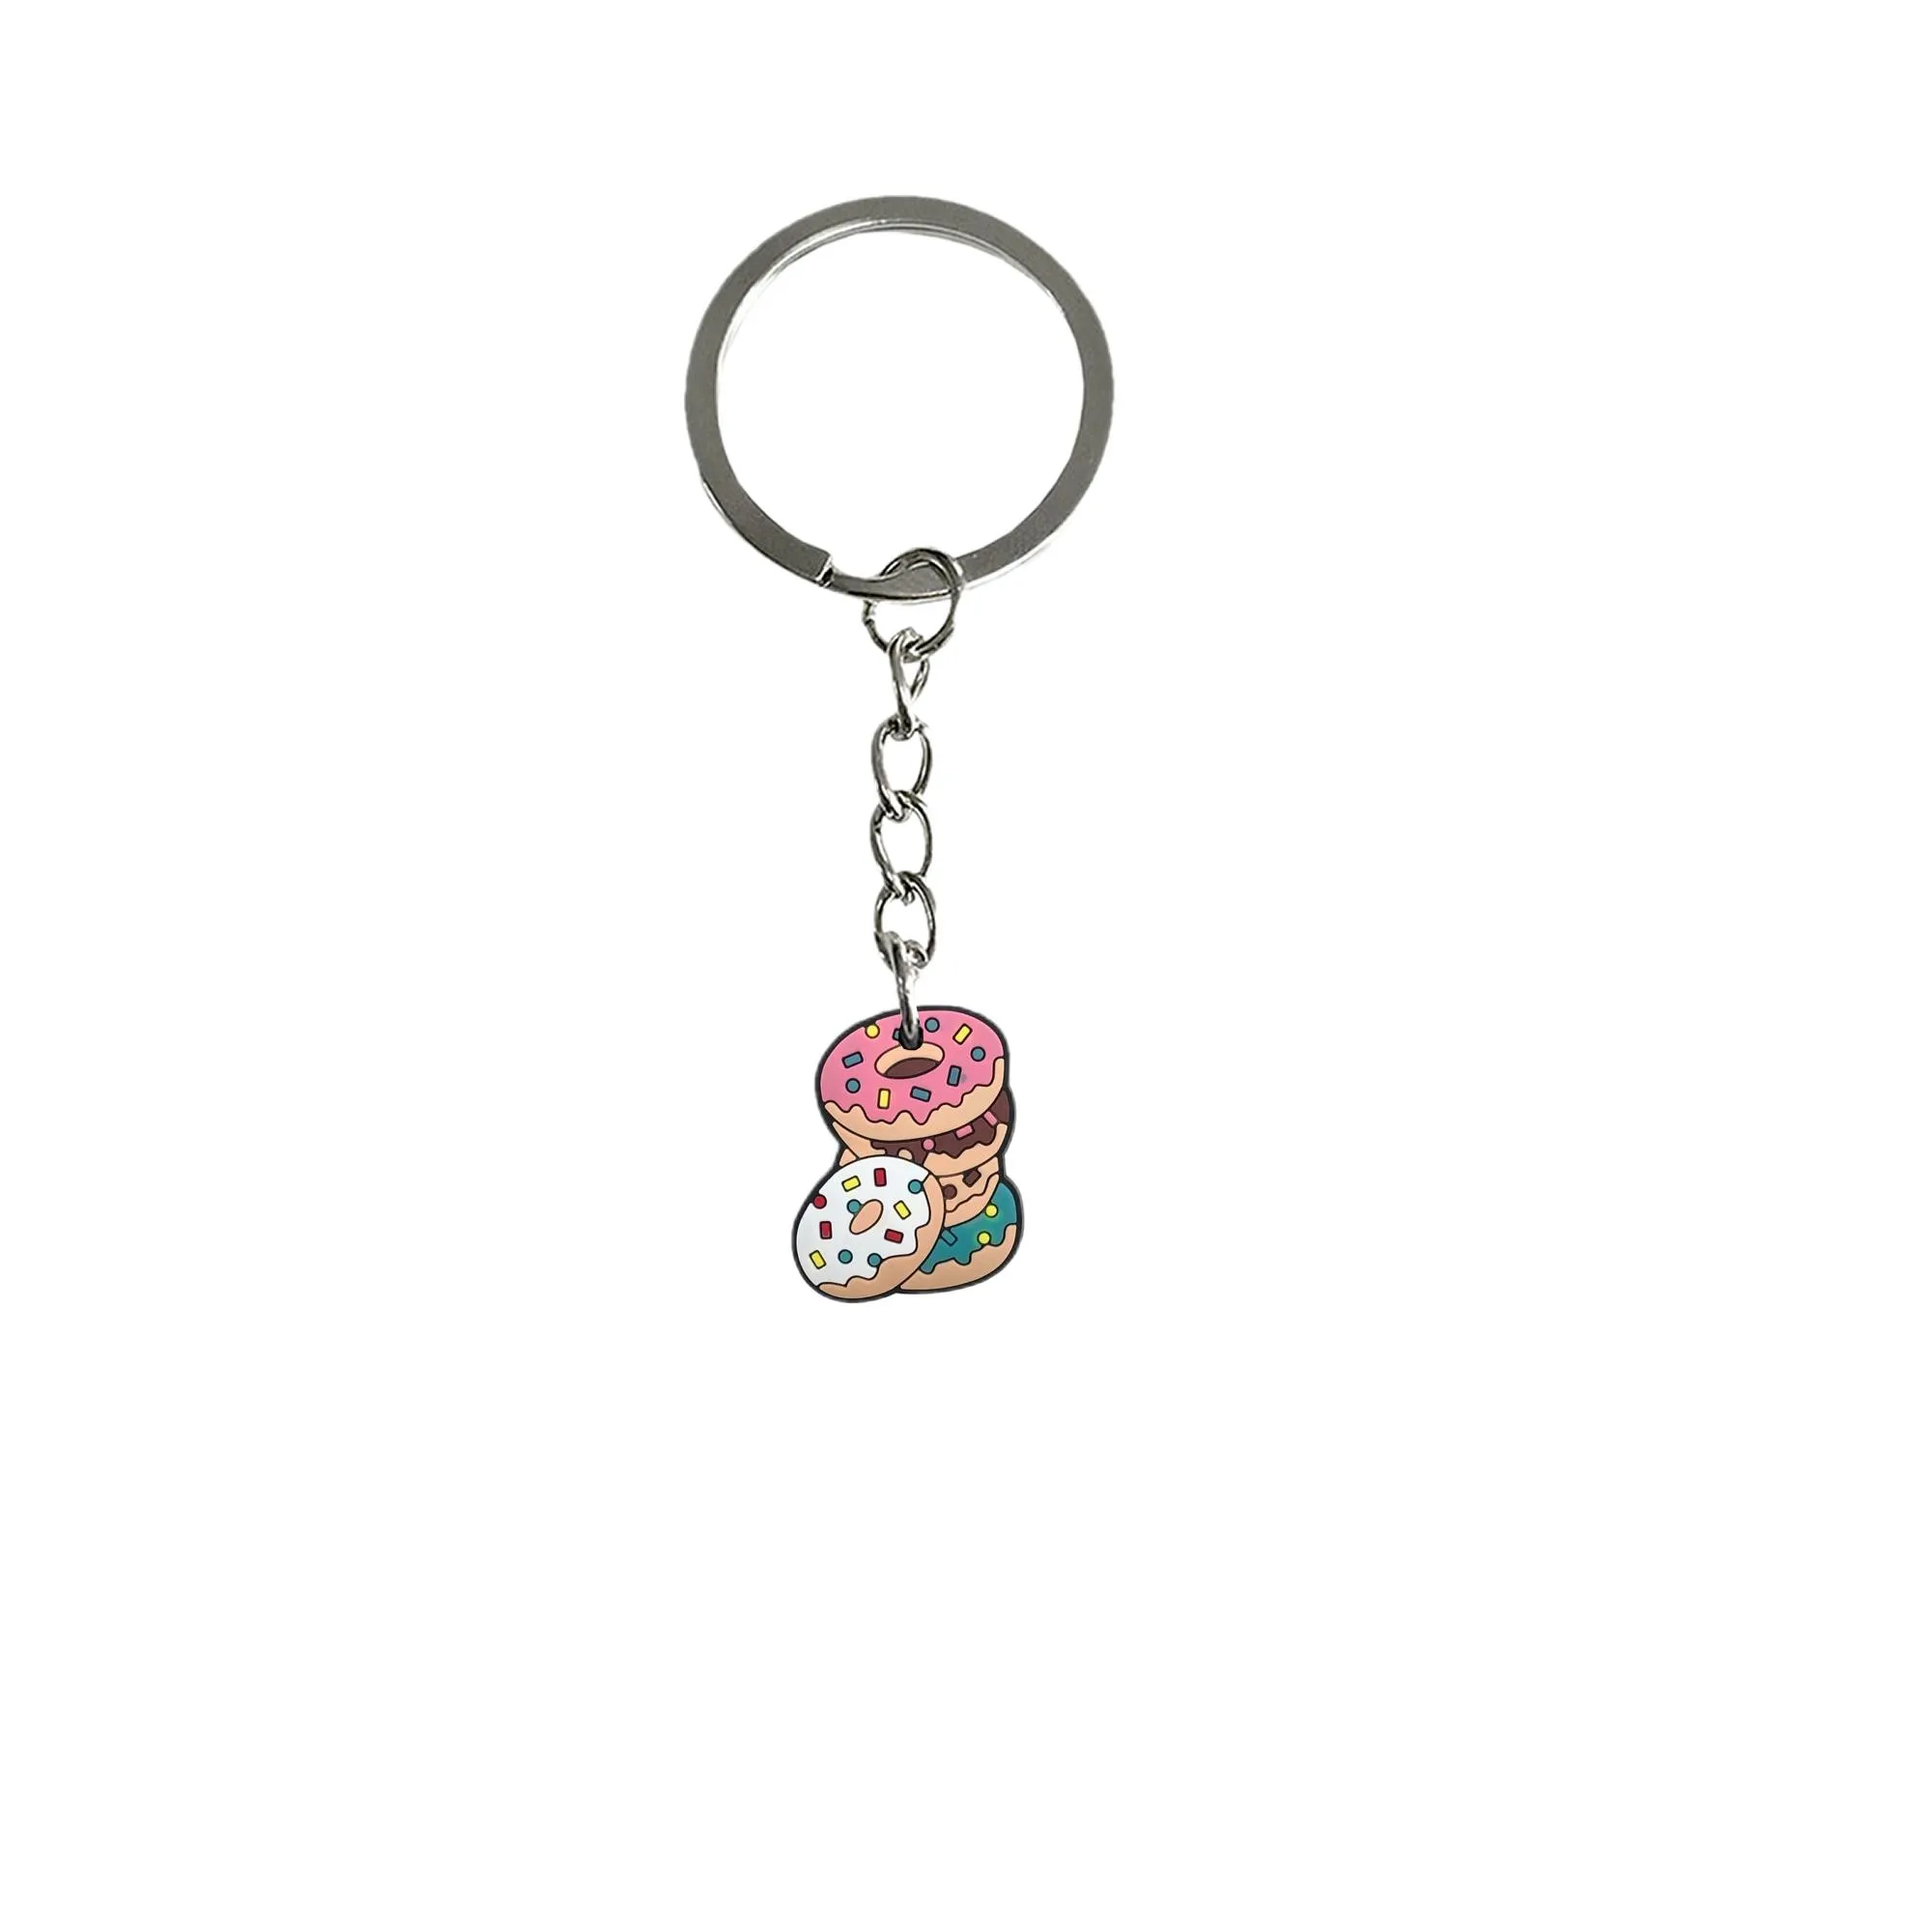 Charms Donuts Keychain For Classroom Prizes Boys Keychains Keyring Men Suitable Schoolbag Goodie Bag Stuffers Supplies Key Ring Women Otgqx